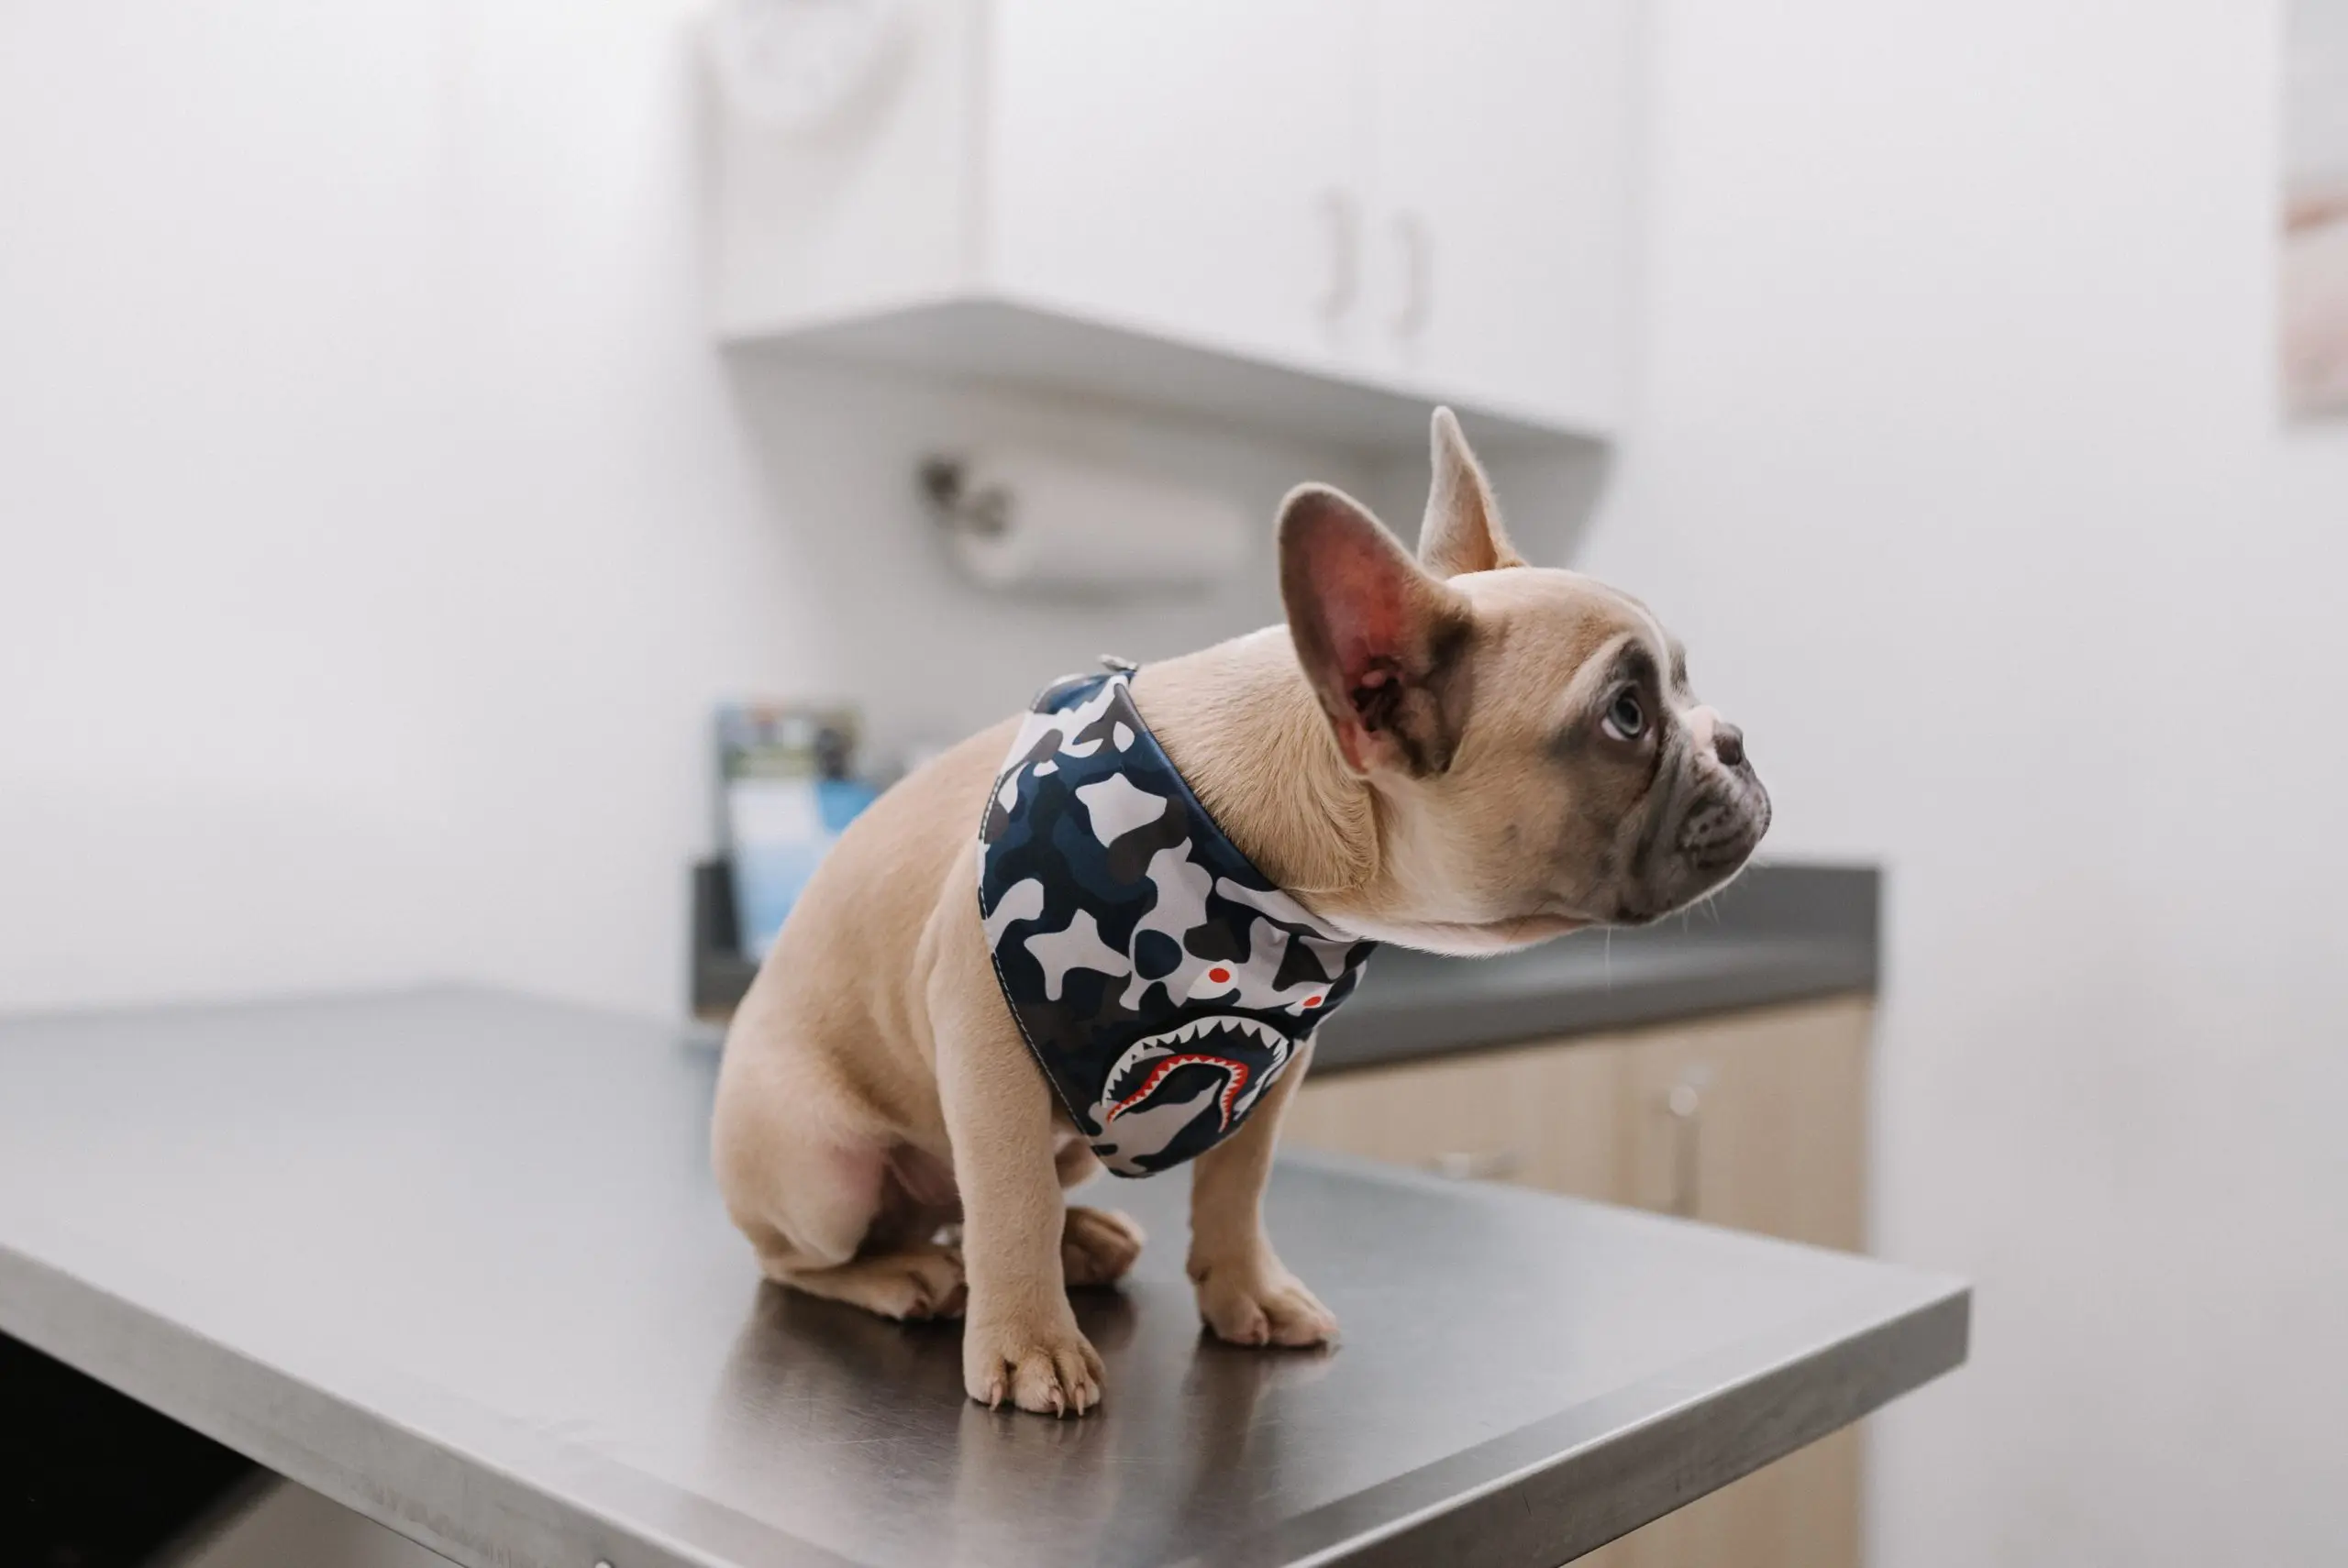 French bulldog wearing a camouflage bandana is sitting on a veterinarian exam table